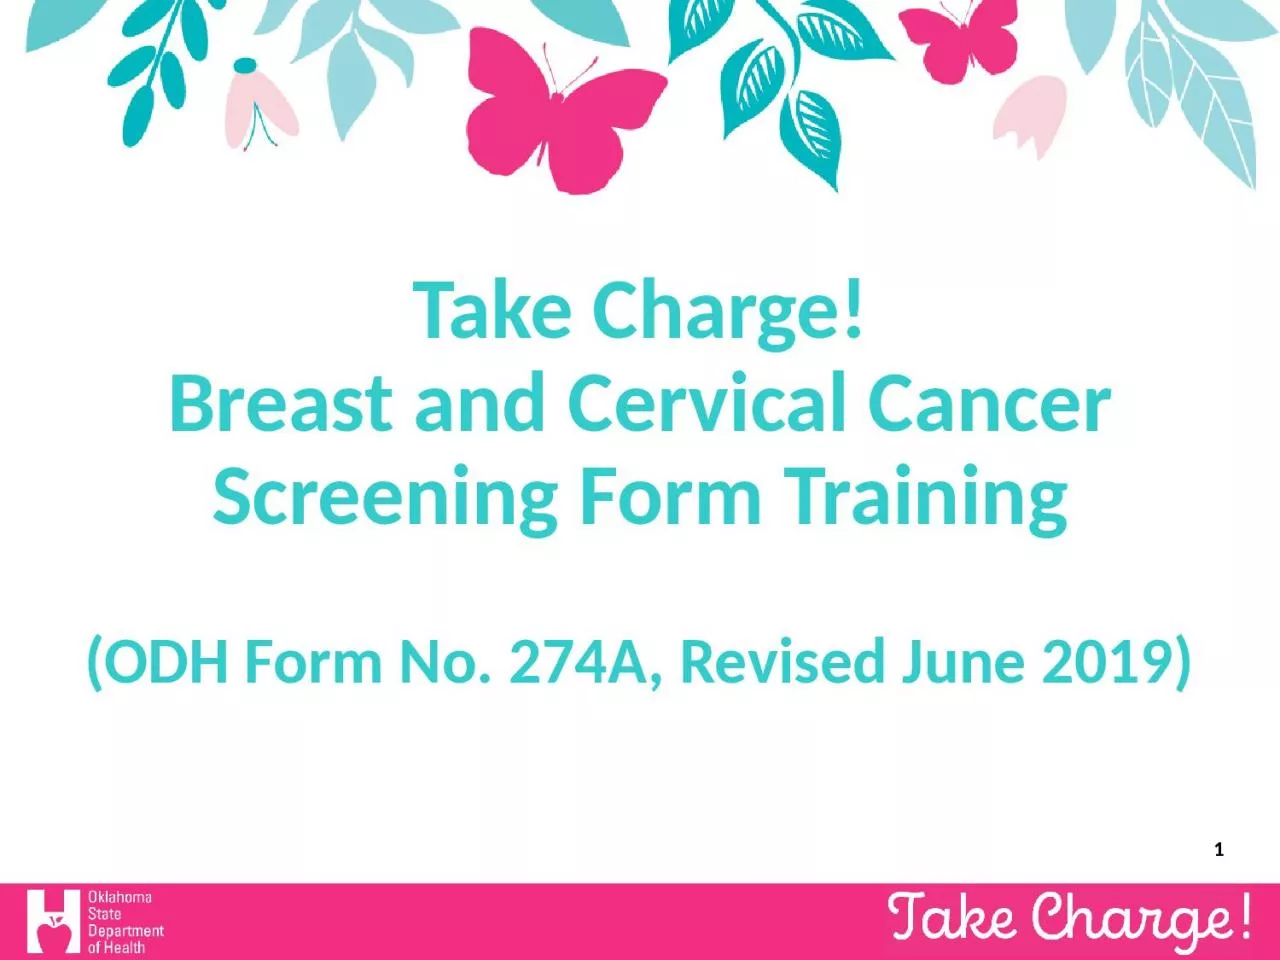 Take Charge! Breast and Cervical Cancer Screening Form Training